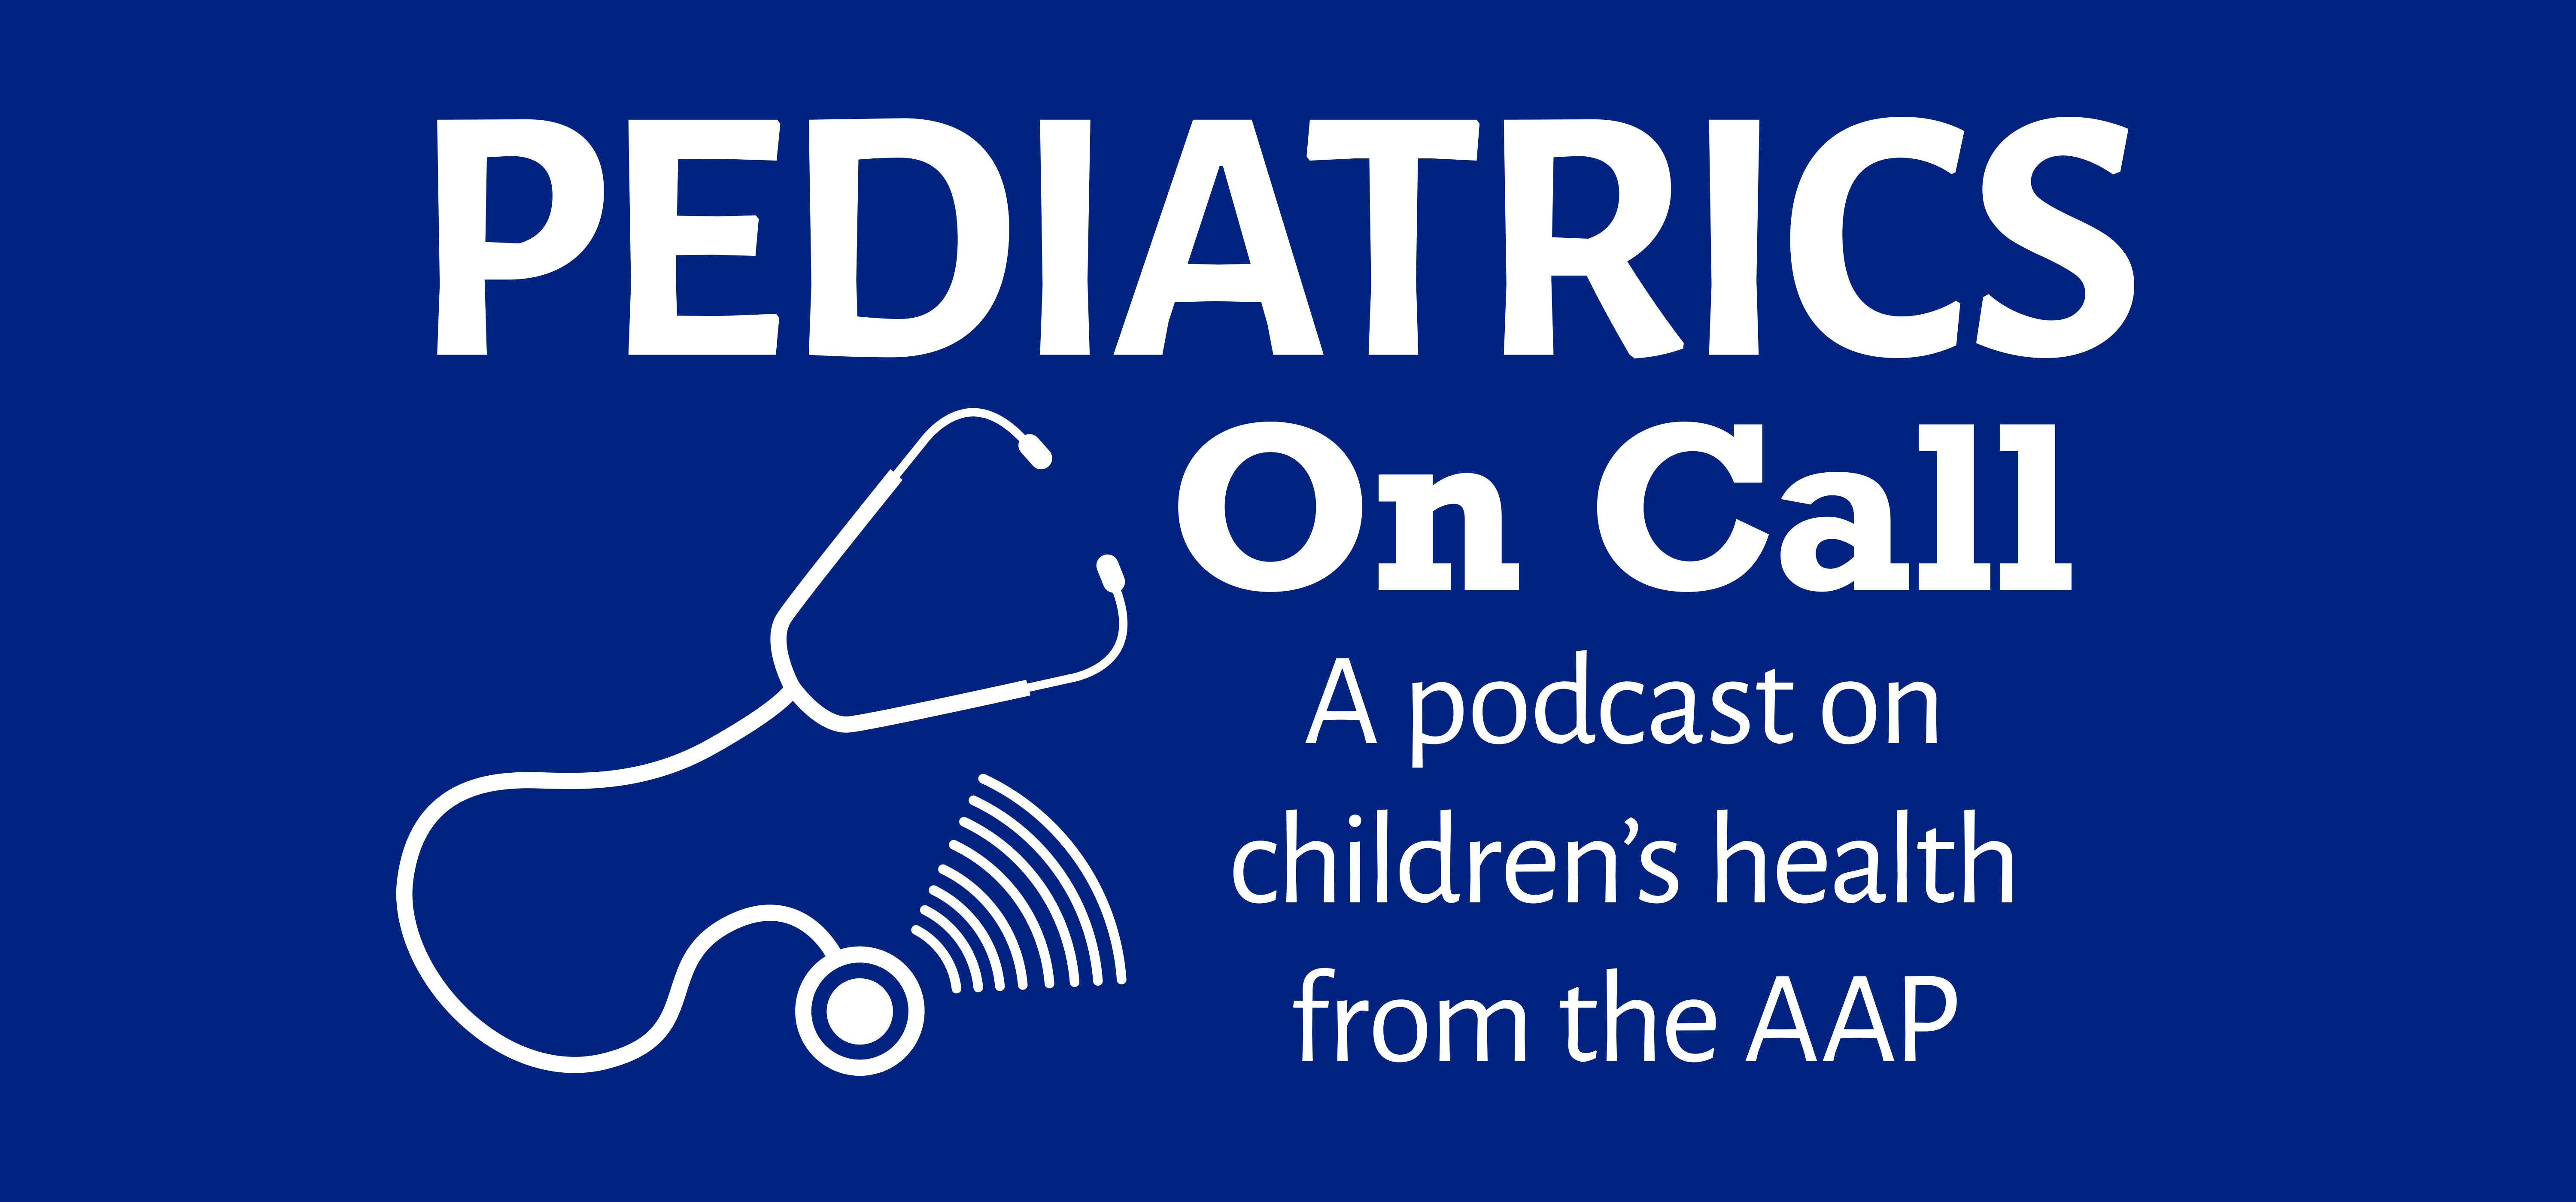 Telehealth During COVID-19, Bariatric Surgery in Adolescents – Episode 44